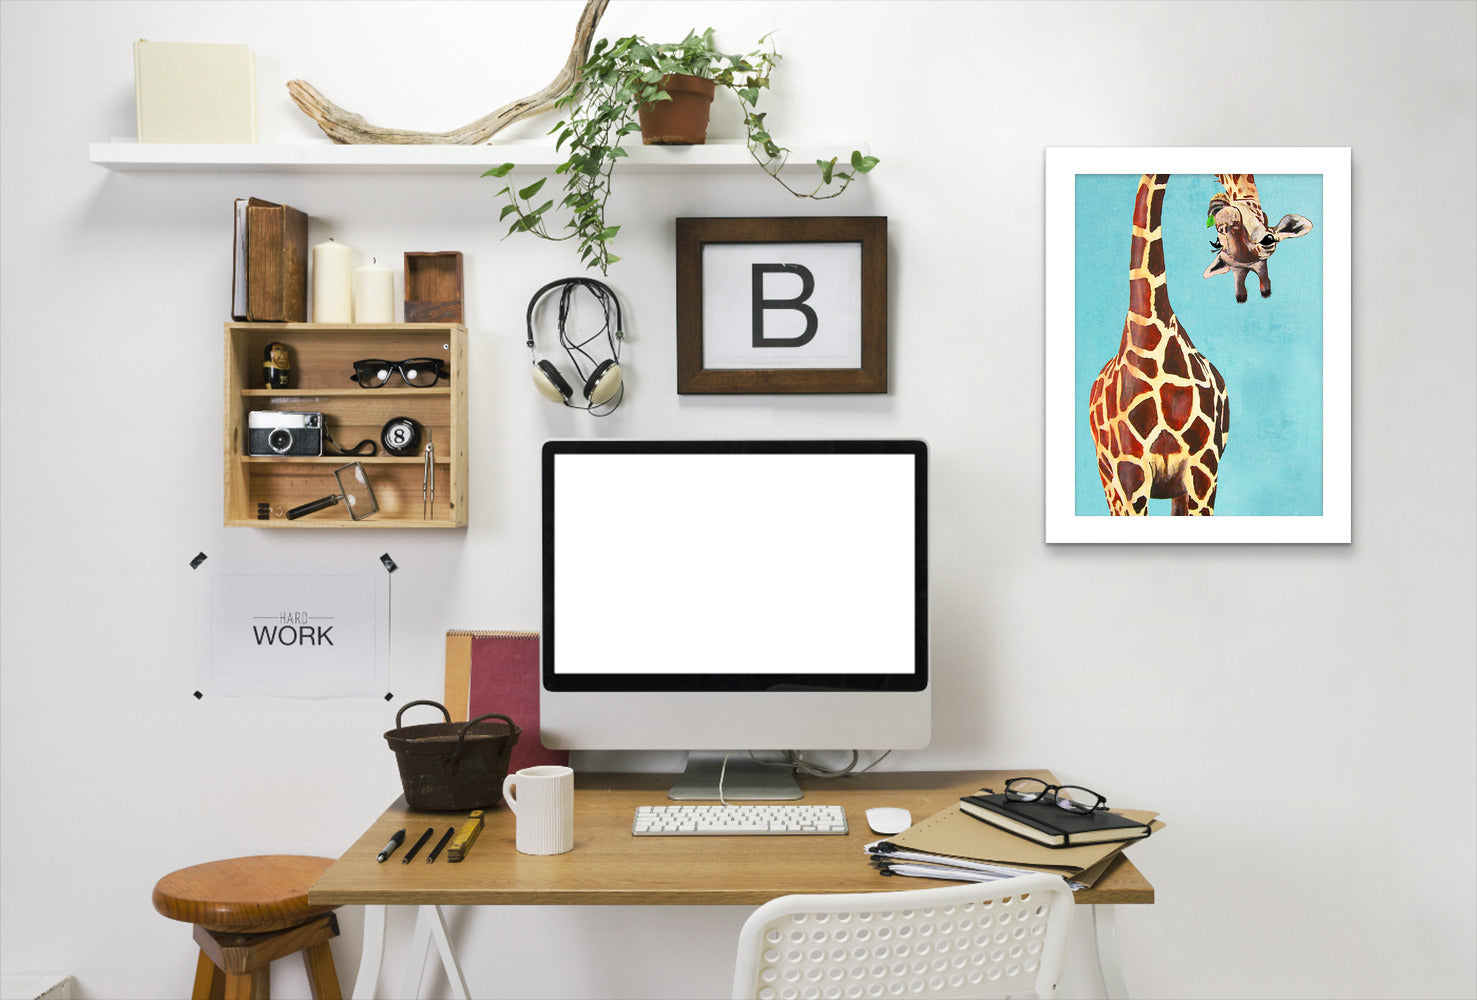 Giraffe With Green Leave By Coco De Paris - White Framed Print - Wall Art - Americanflat